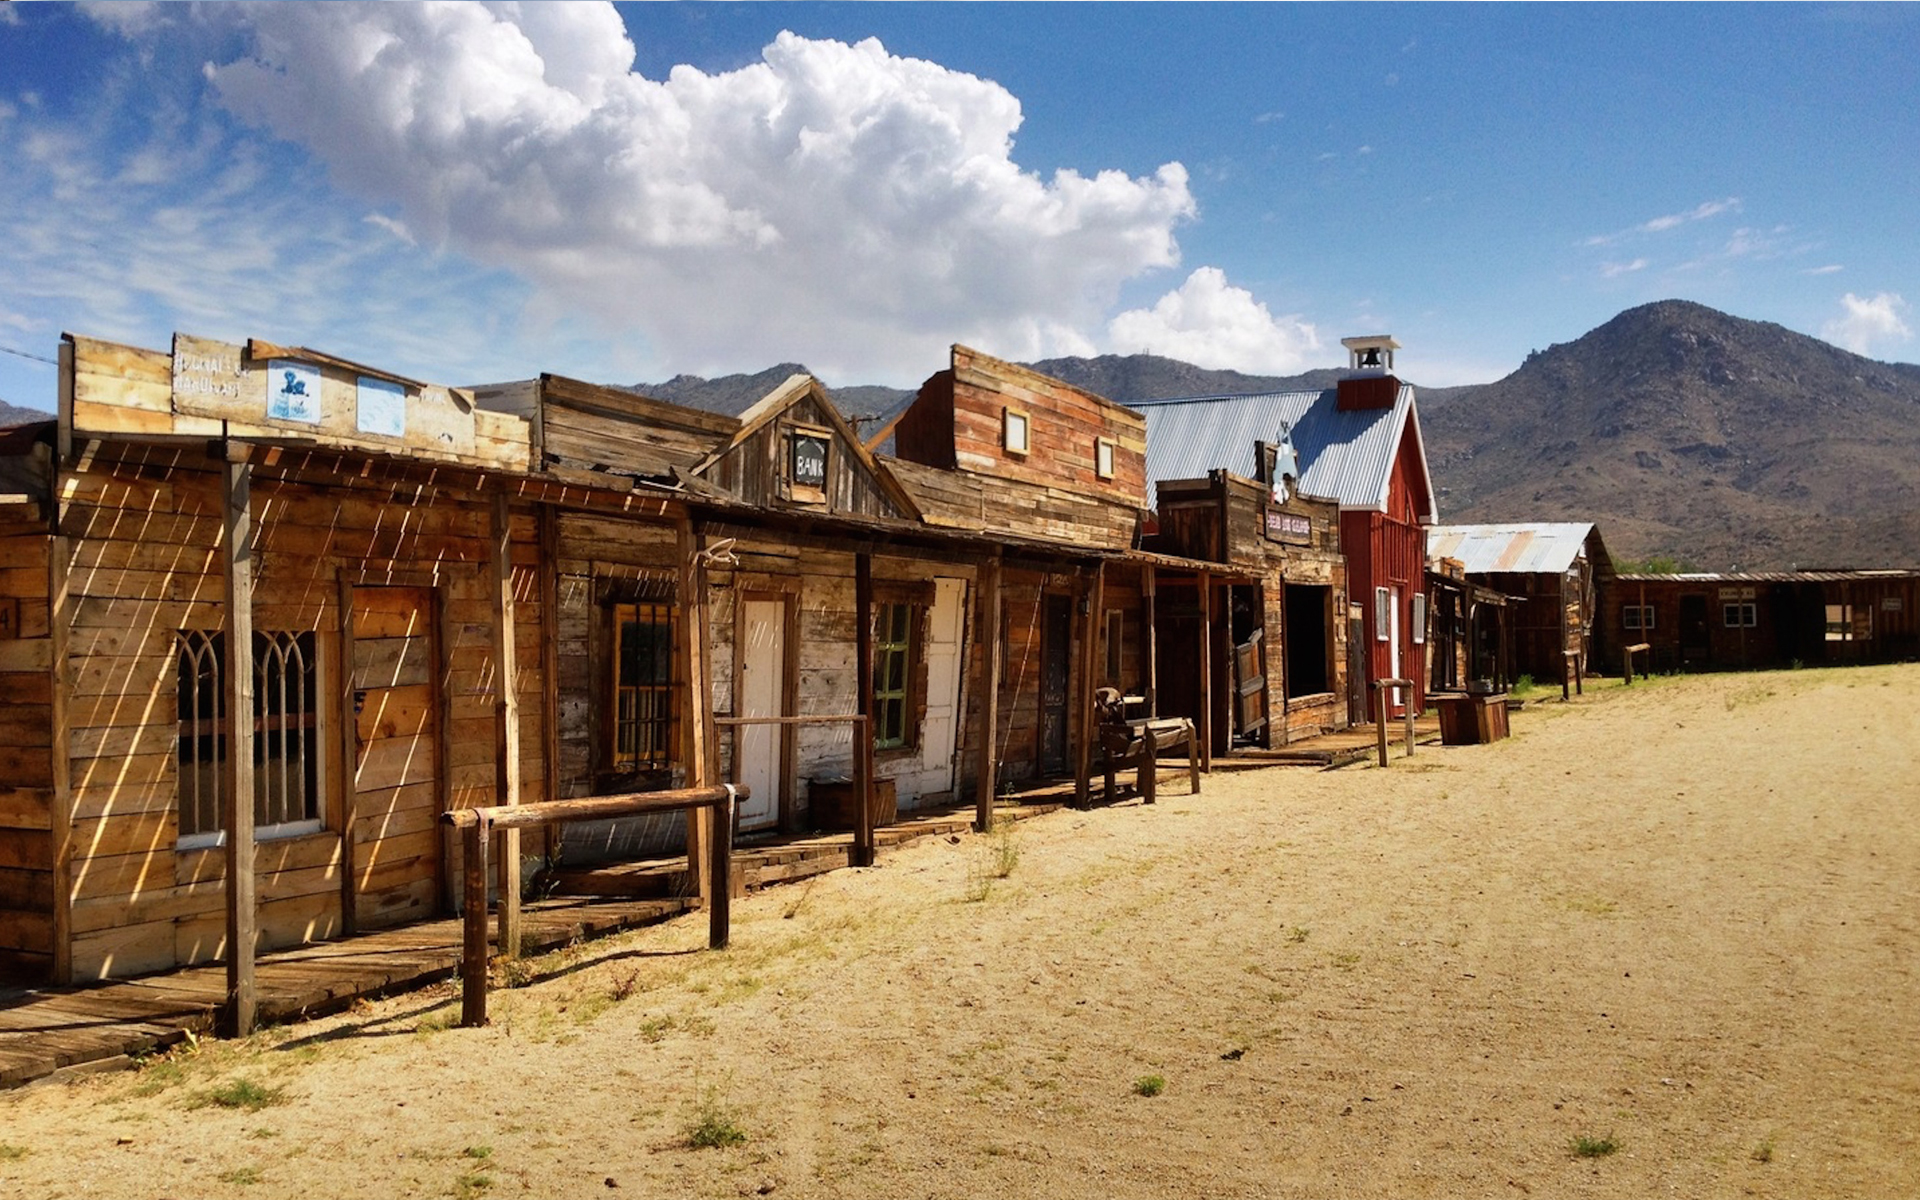 Ghost Towns - The Old West